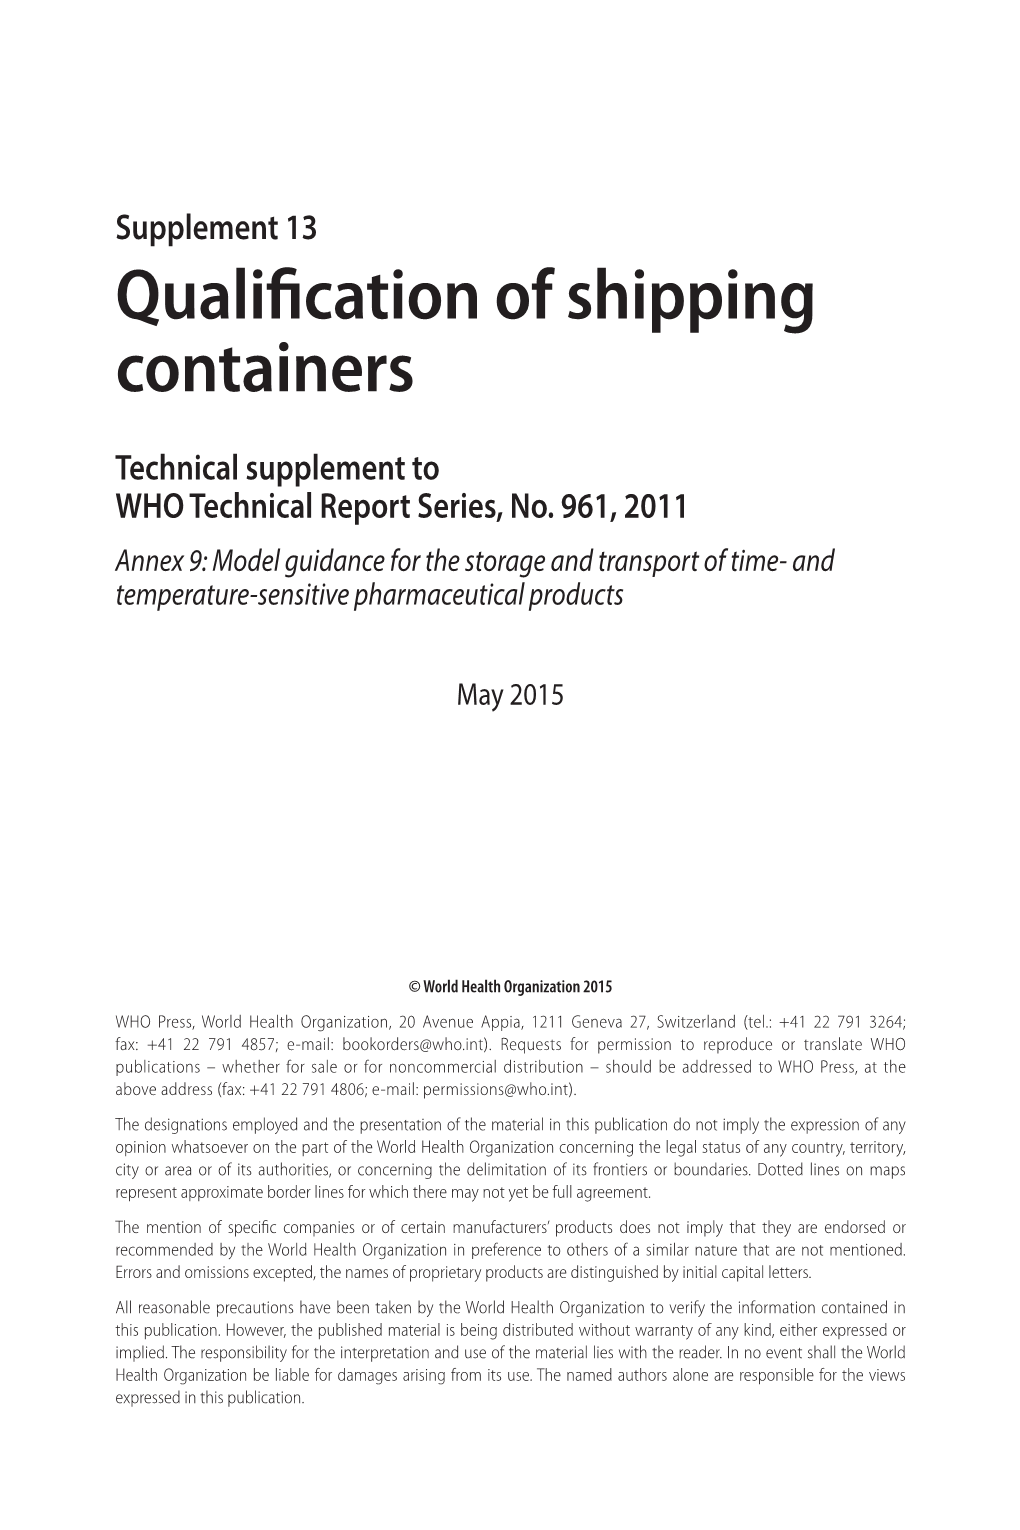 Technical Supplement 13: Qualification of Shipping Containers